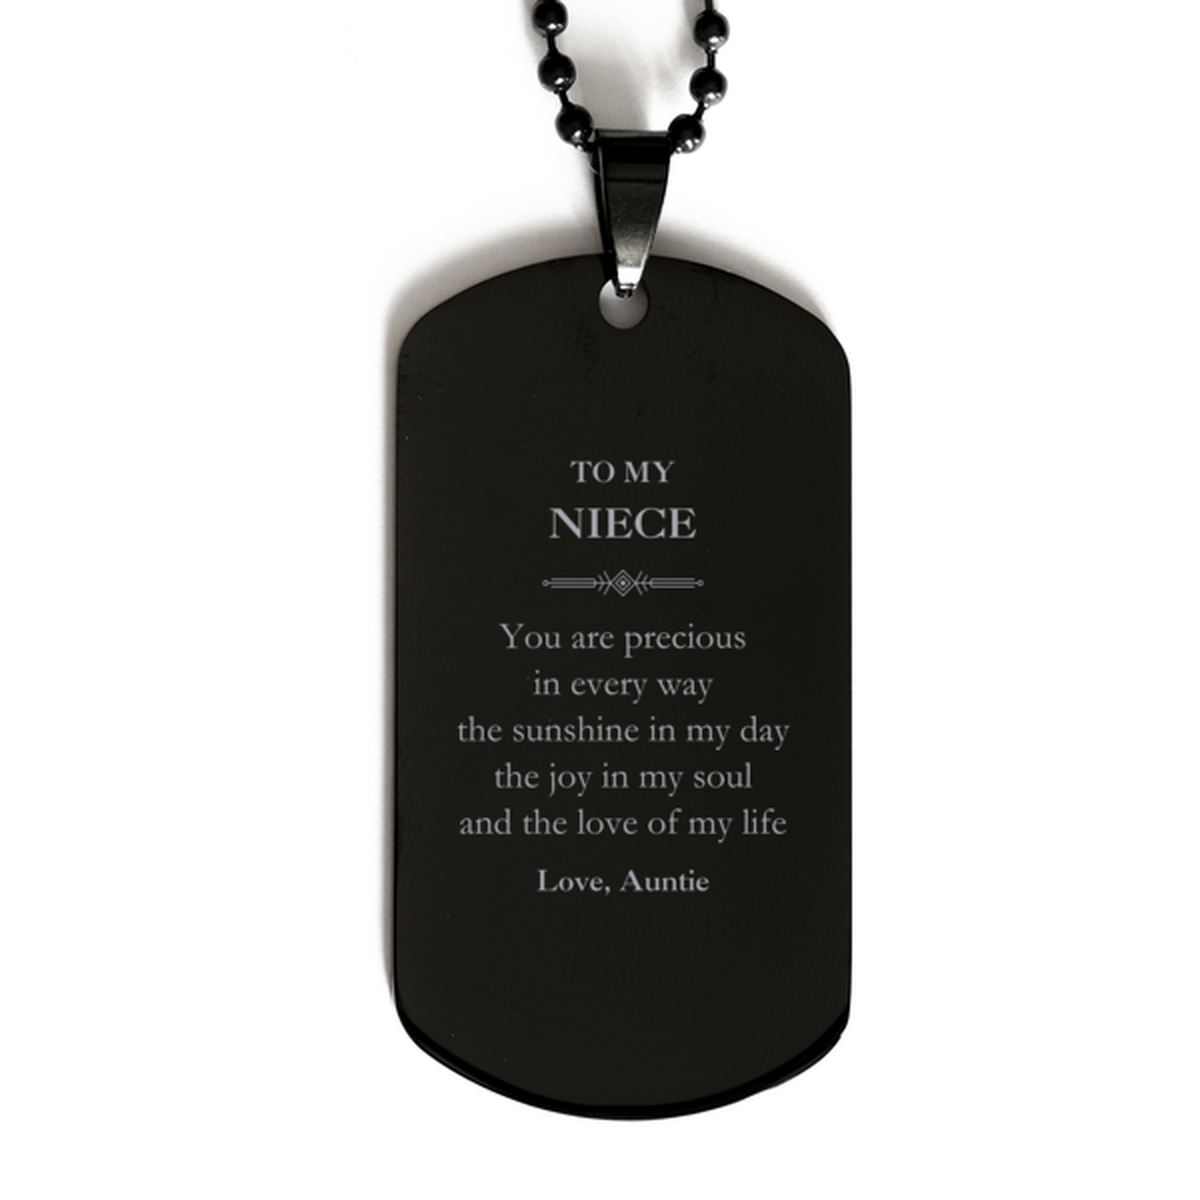 Graduation Gifts for Niece Black Dog Tag Present from Auntie, Christmas Niece Birthday Gifts Niece You are precious in every way the sunshine in my day. Love, Auntie